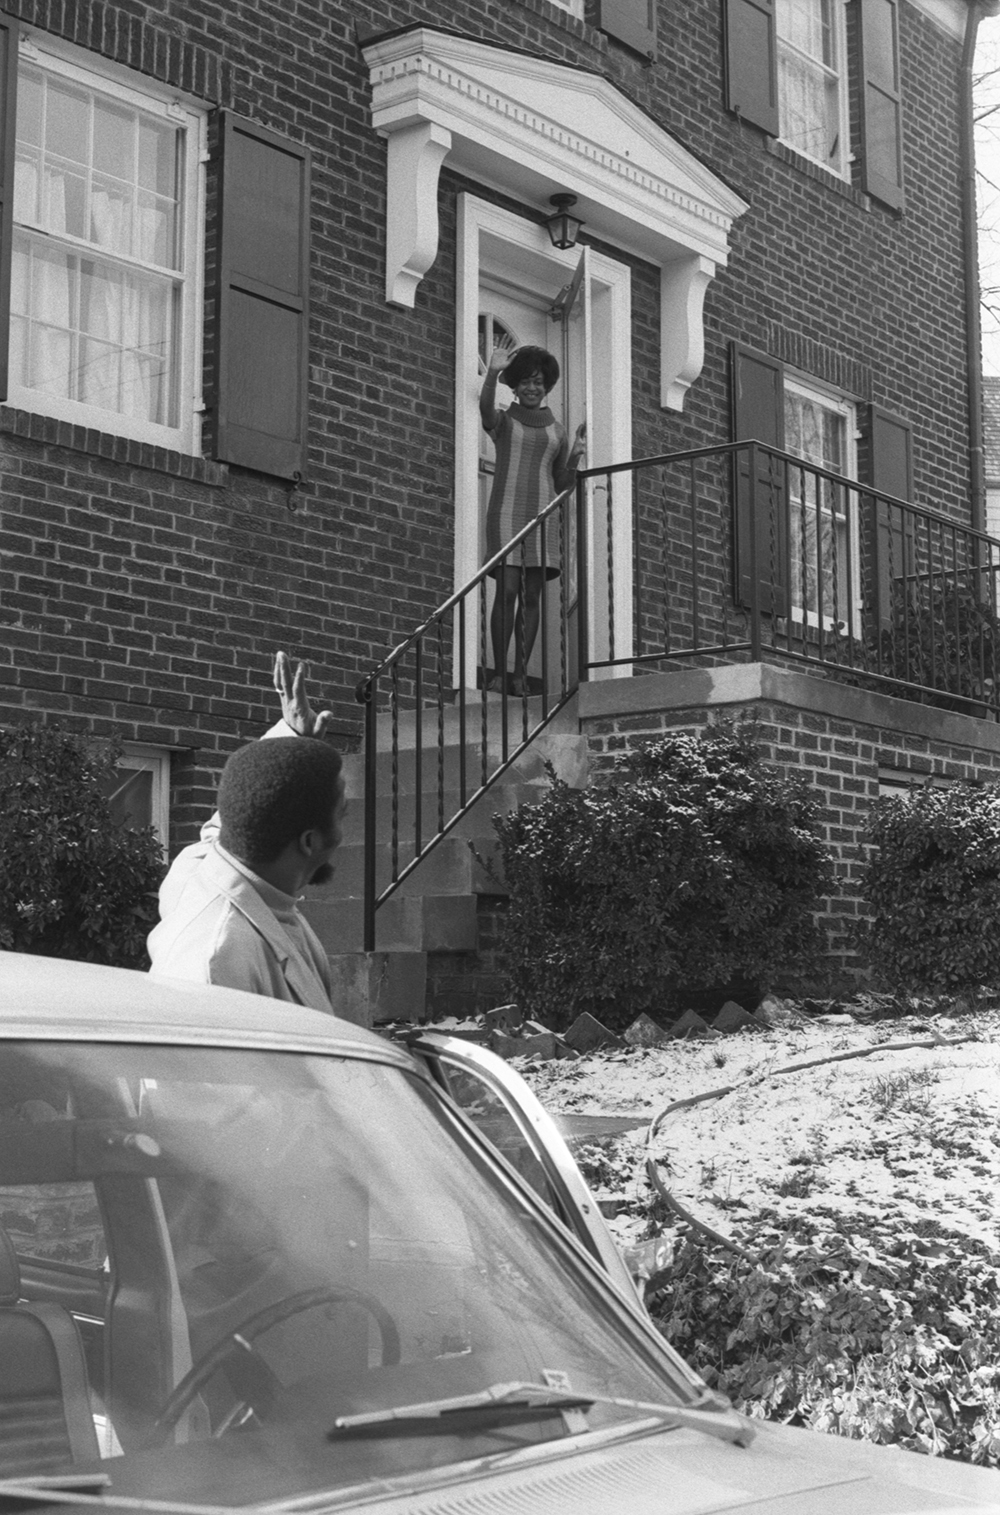 Man at his car, waving goodbye to a family member in the doorway of a house in the suburbs, 1969. Photograph by Roland L. Freeman. Library of Congress, Prints and Photographs Division.